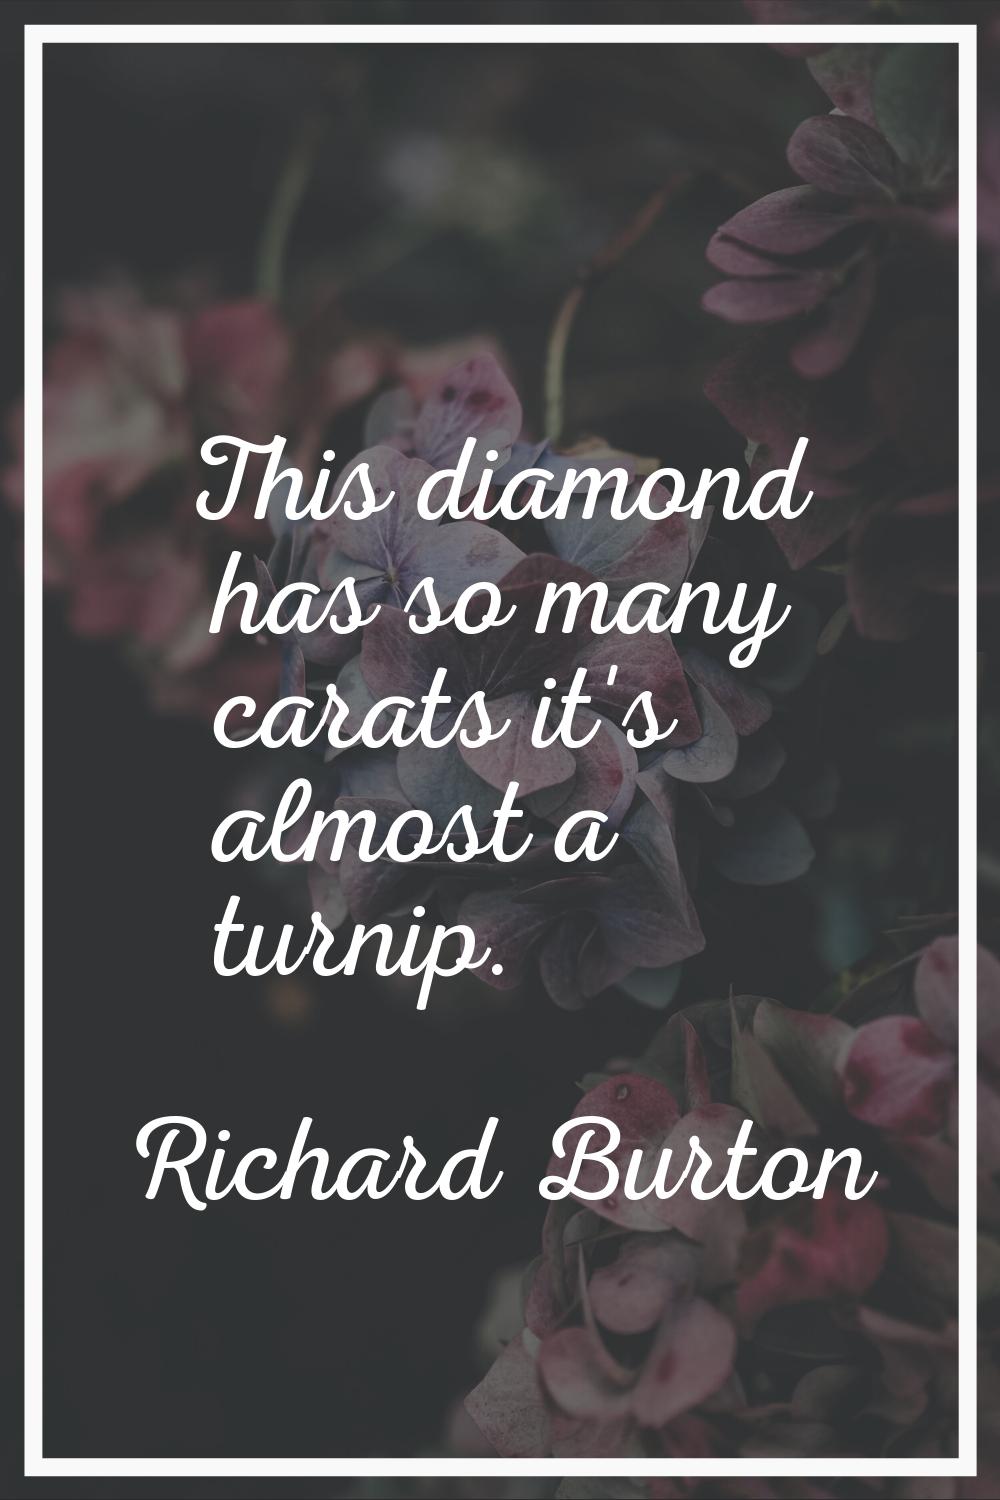 This diamond has so many carats it's almost a turnip.